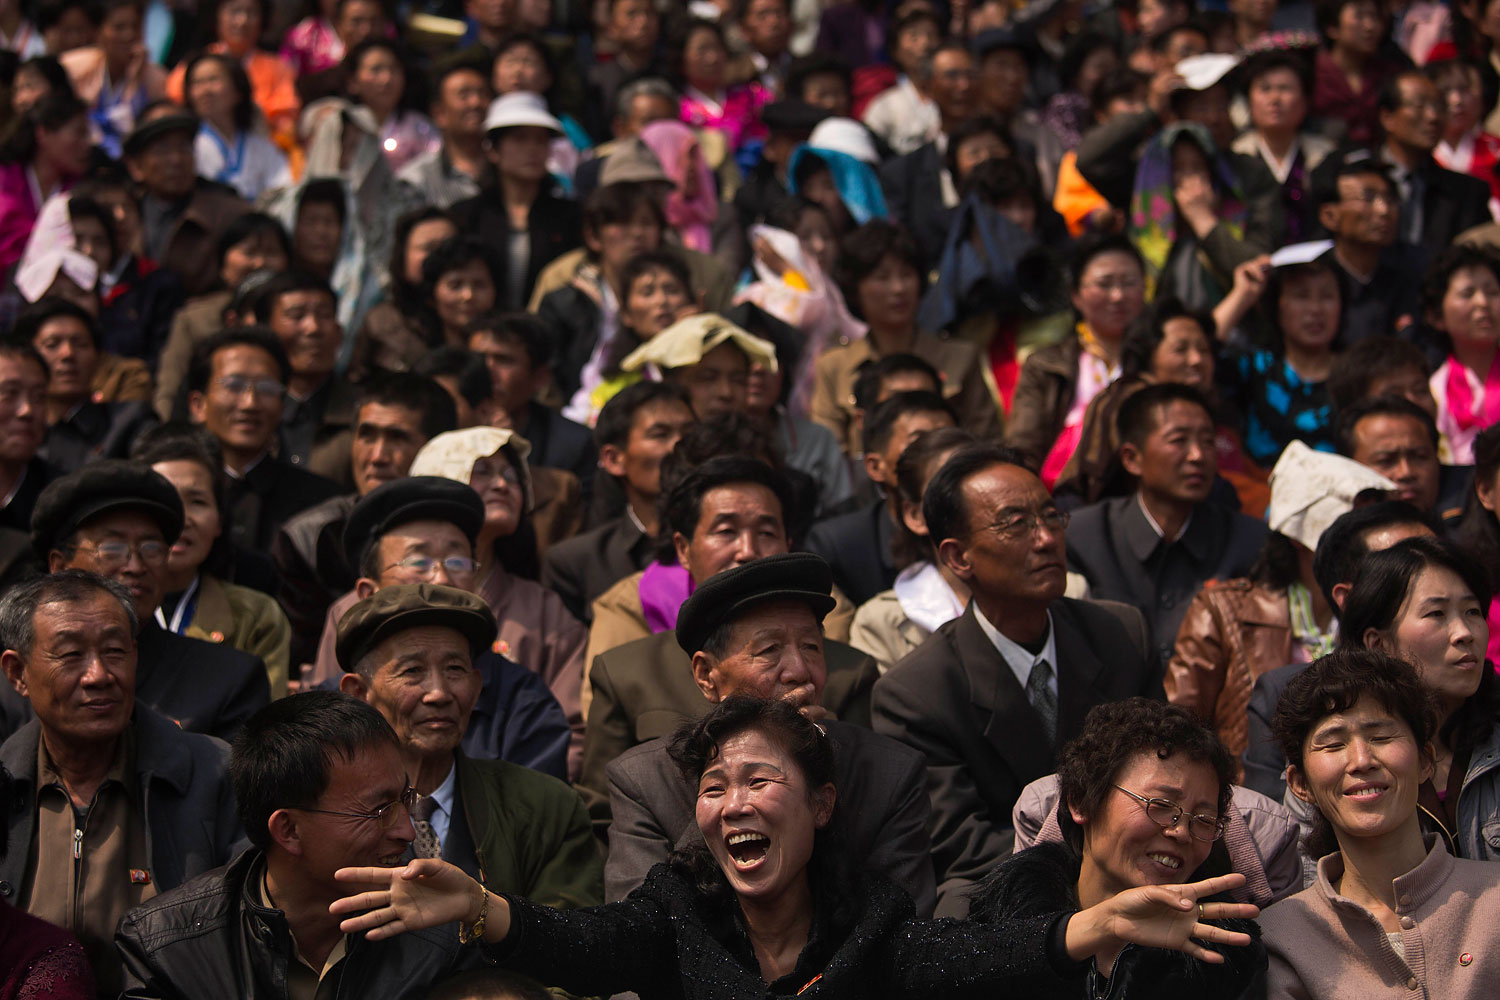 North Korean spectators watch and cheer from the stands of Kim Il Sung Stadium as runners arrive at the finish of the Mangyongdae Prize International Marathon in Pyongyang on April 13, 2014.